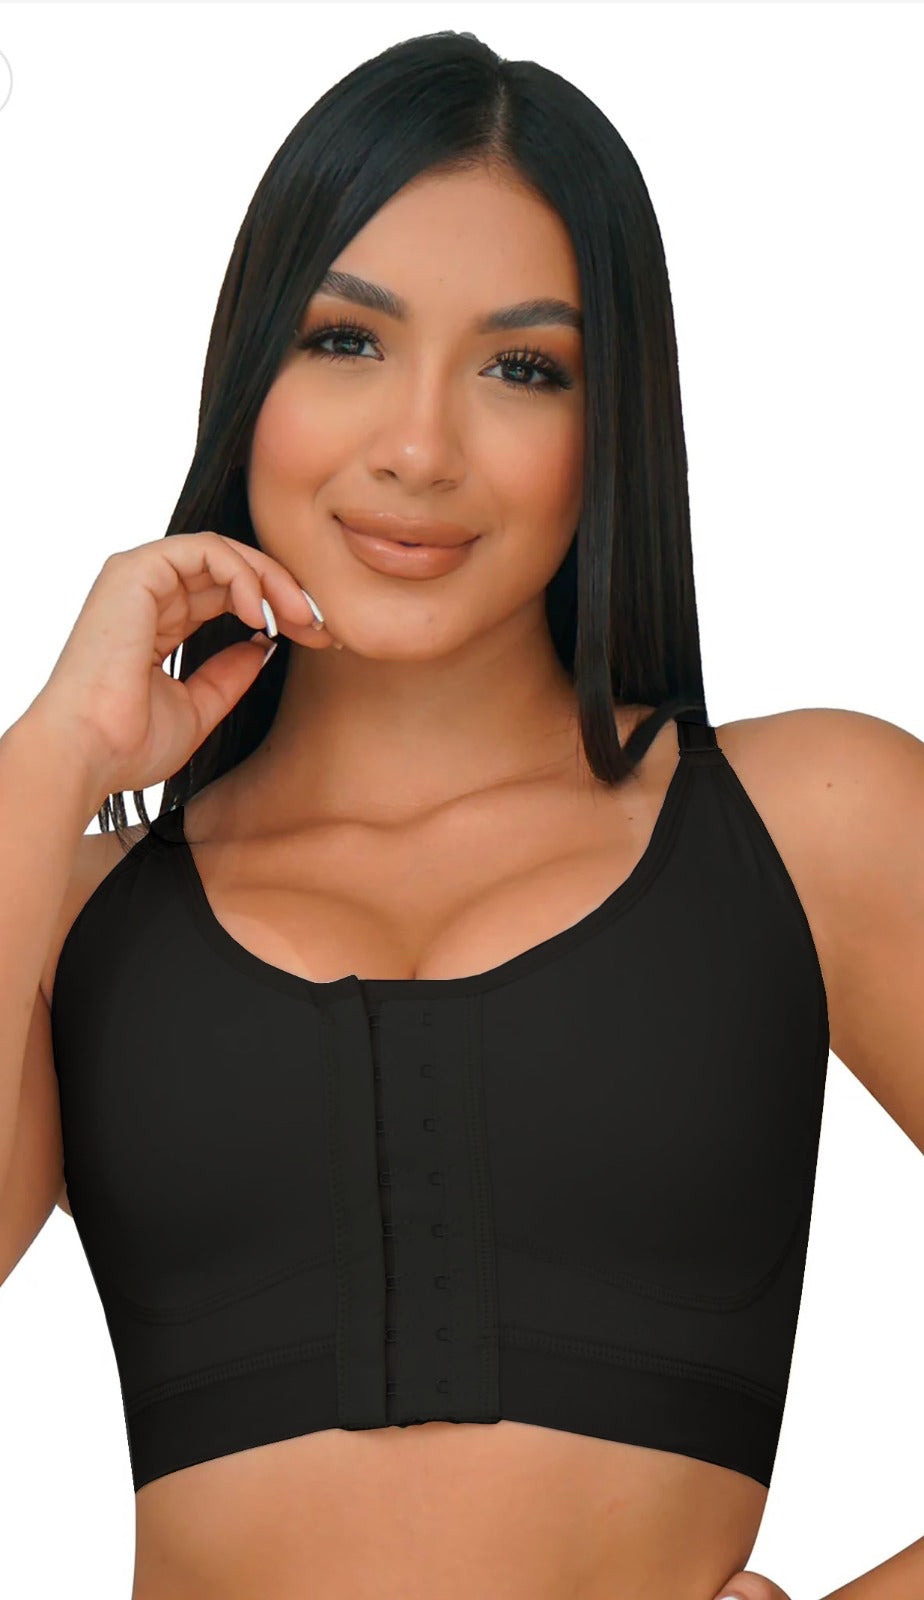 Posture Corrector Bra With Snaps In Front – Fierce Body Colombian Fajas